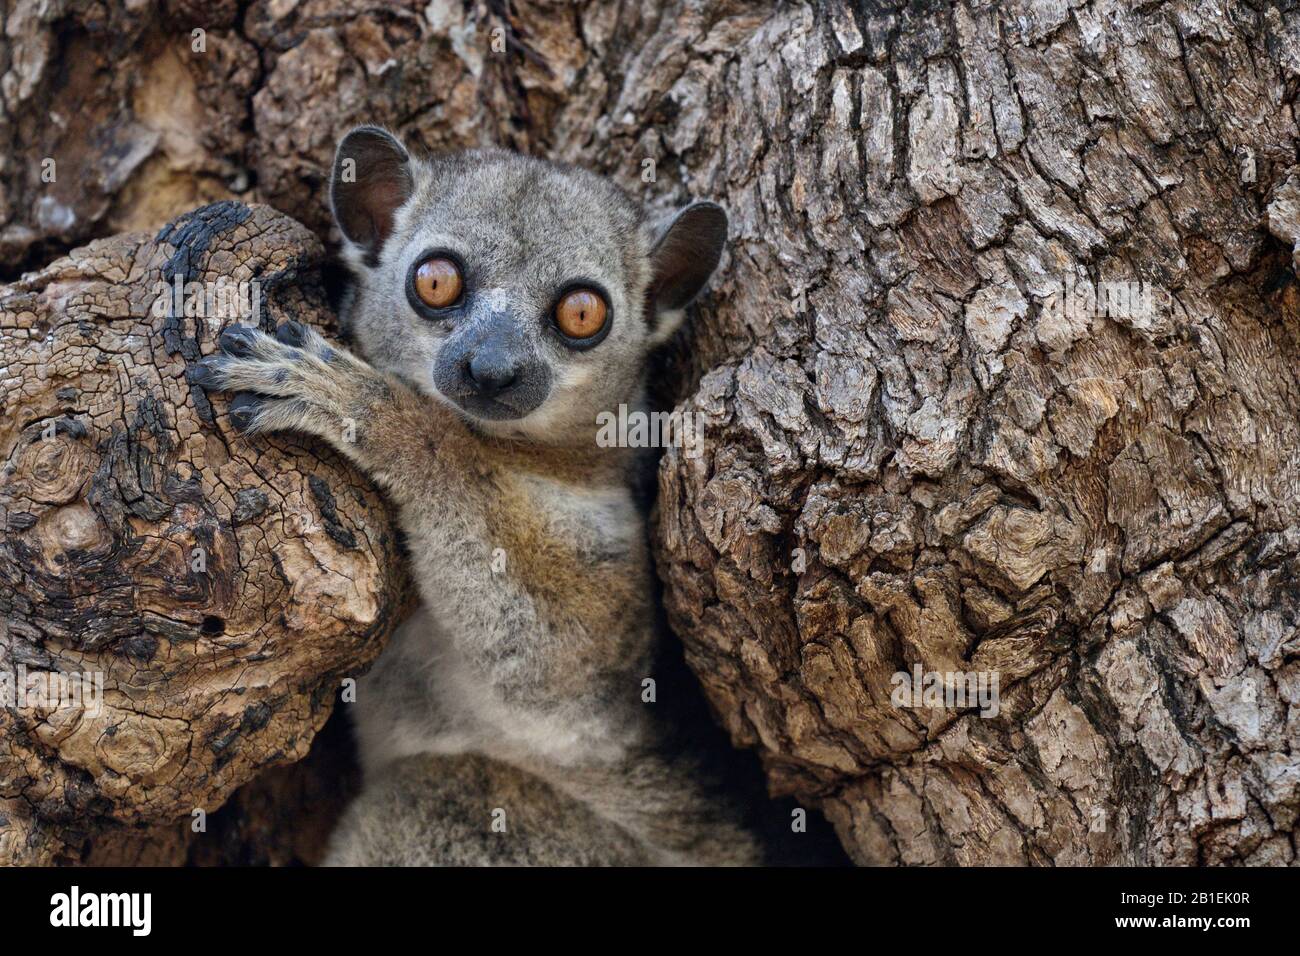 Red-tailed sportive lemur in the hollow of a dry forest tree, Kirindy Forest, Menabe Region, Madagascar Stock Photo